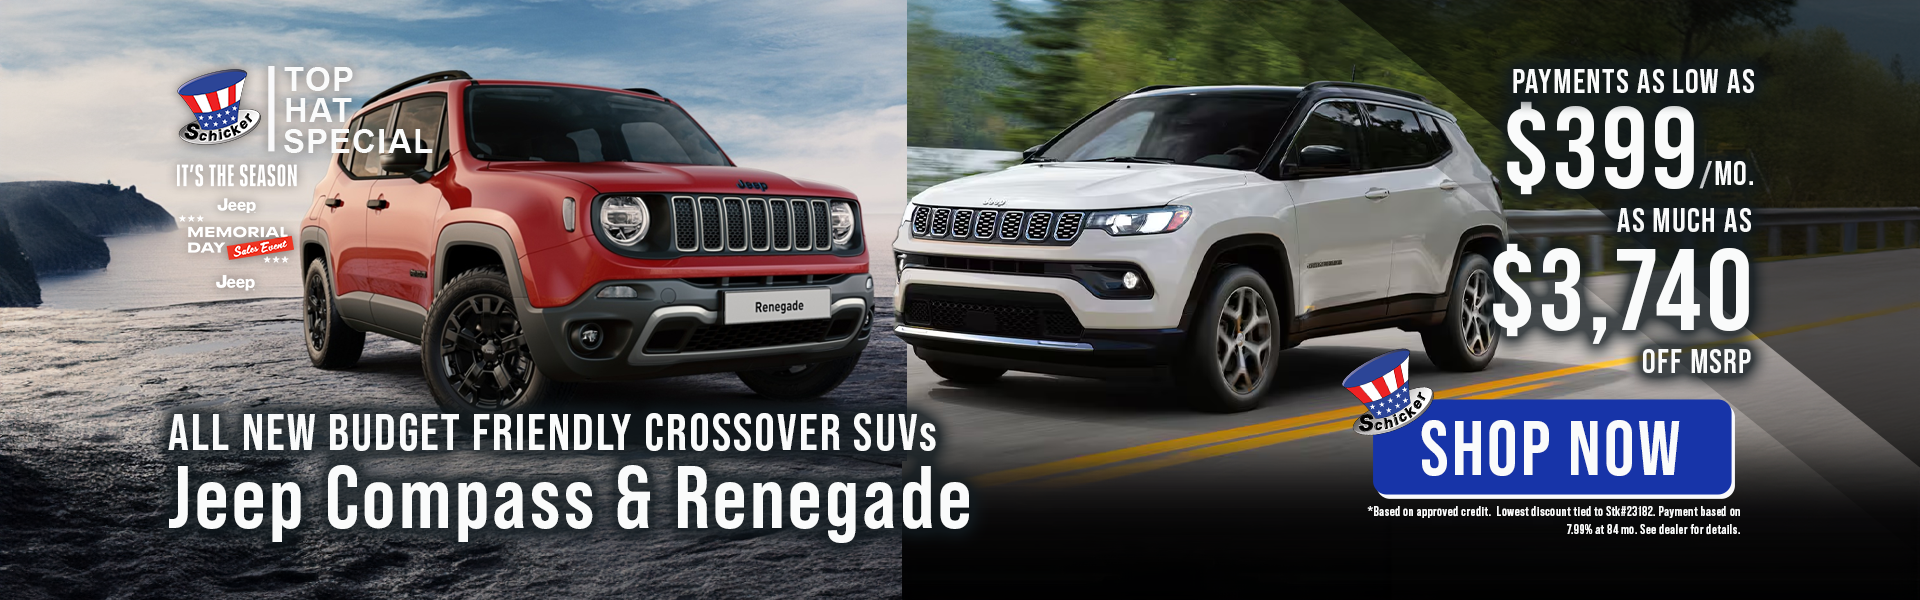 Jeep Compass and Renegade